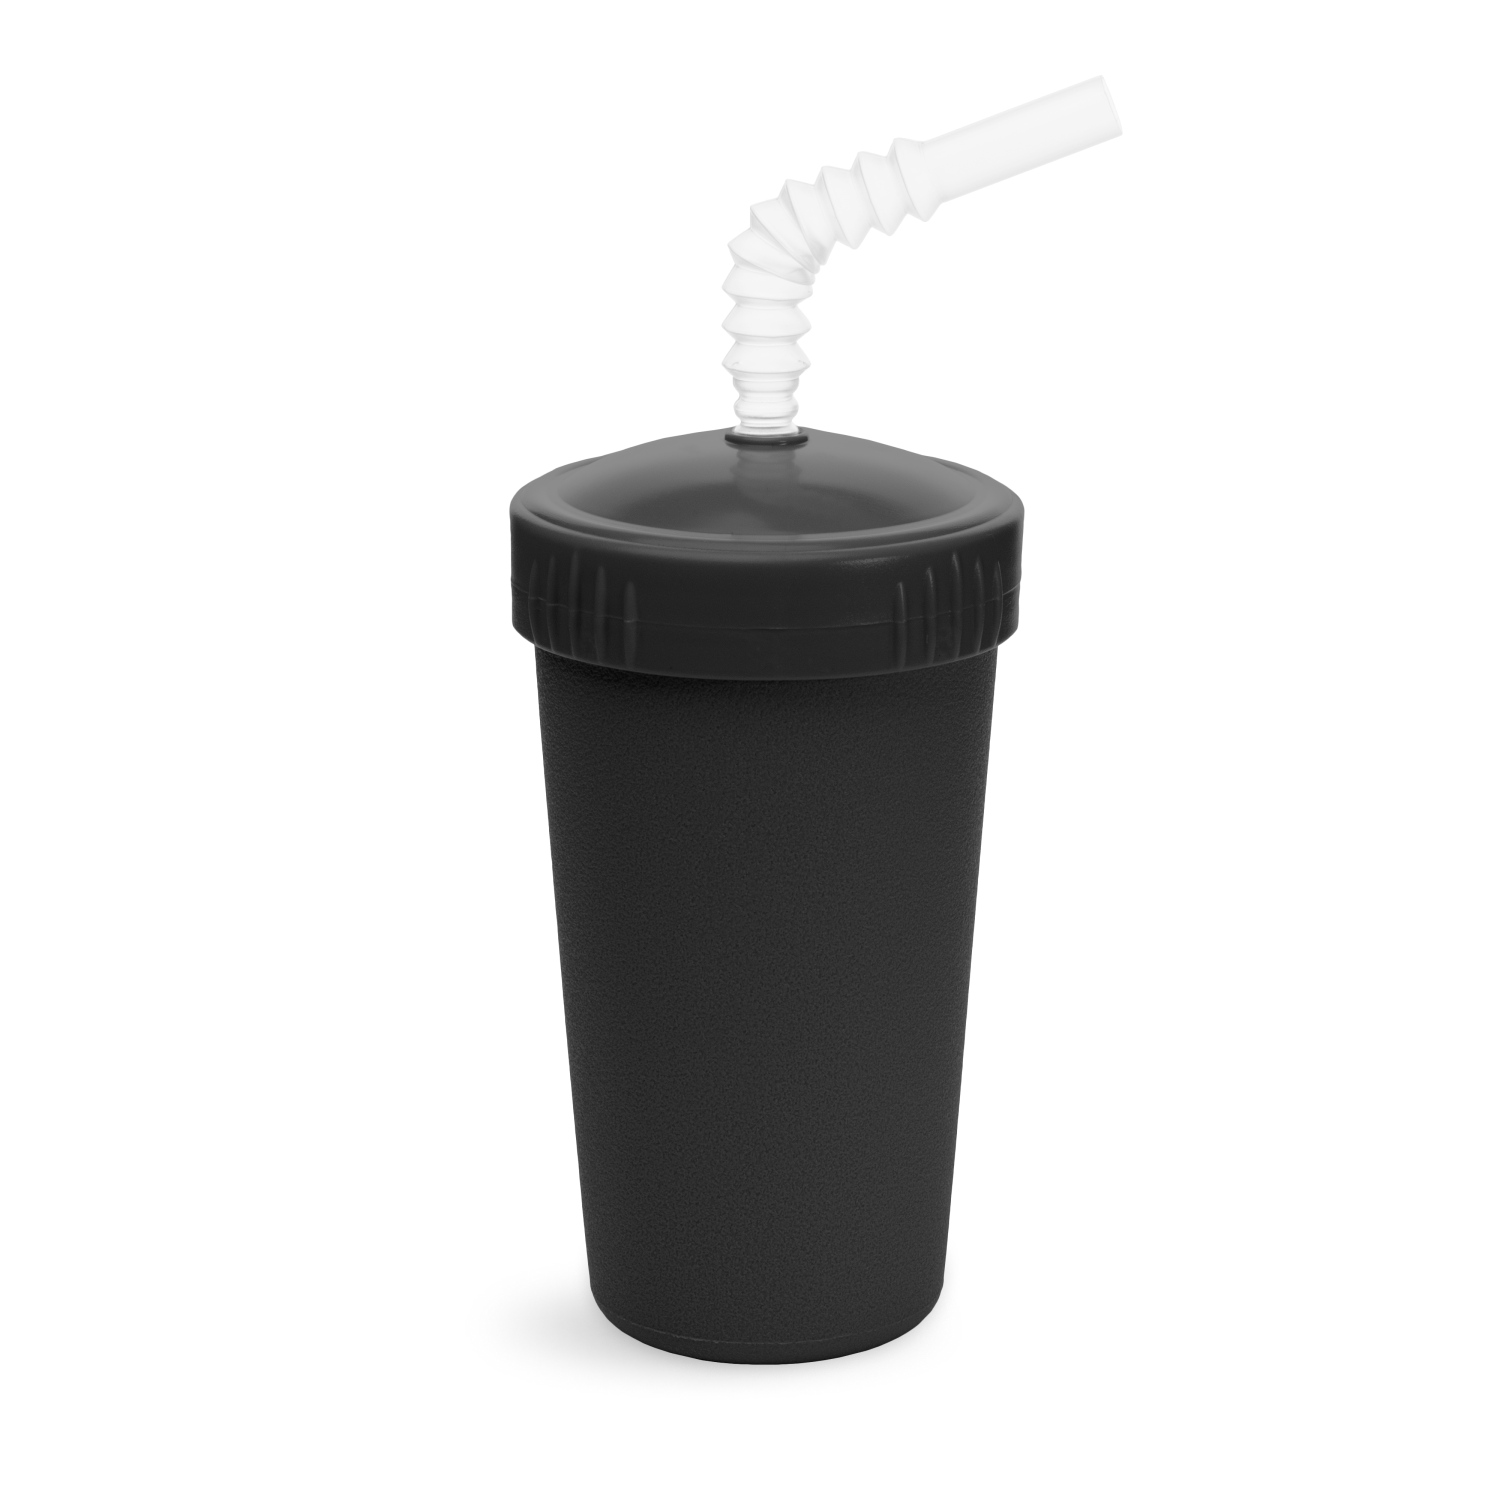 Hard Plastic Cups With Lid And Straw Kids Smoothie Black Kawaii